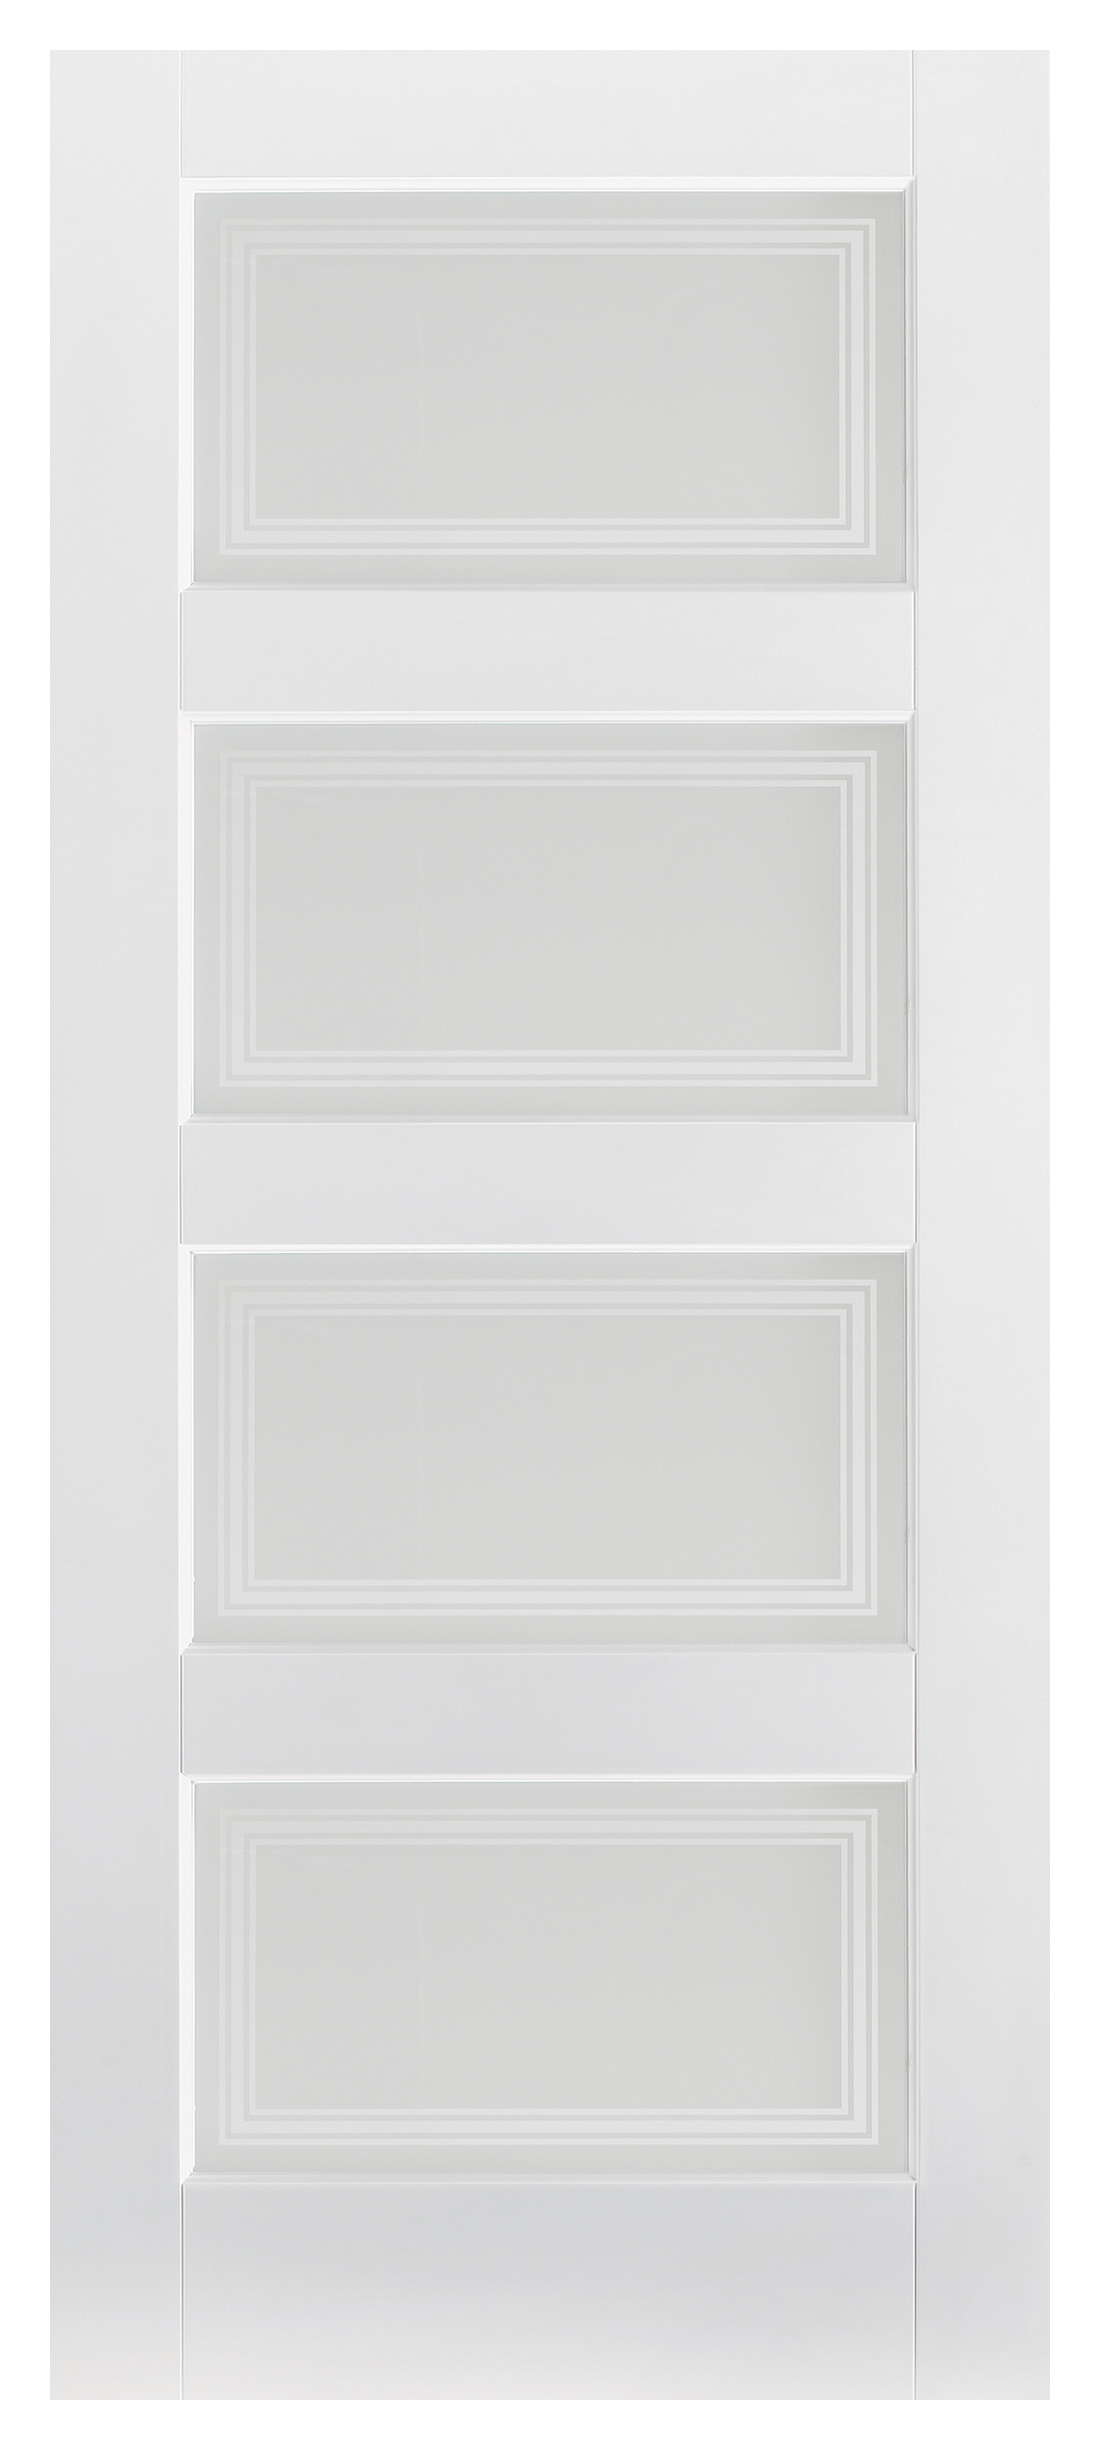 Image of LPD Internal Contemporary 4 Lite Primed White Solid Core Door - 838 x 1981mm